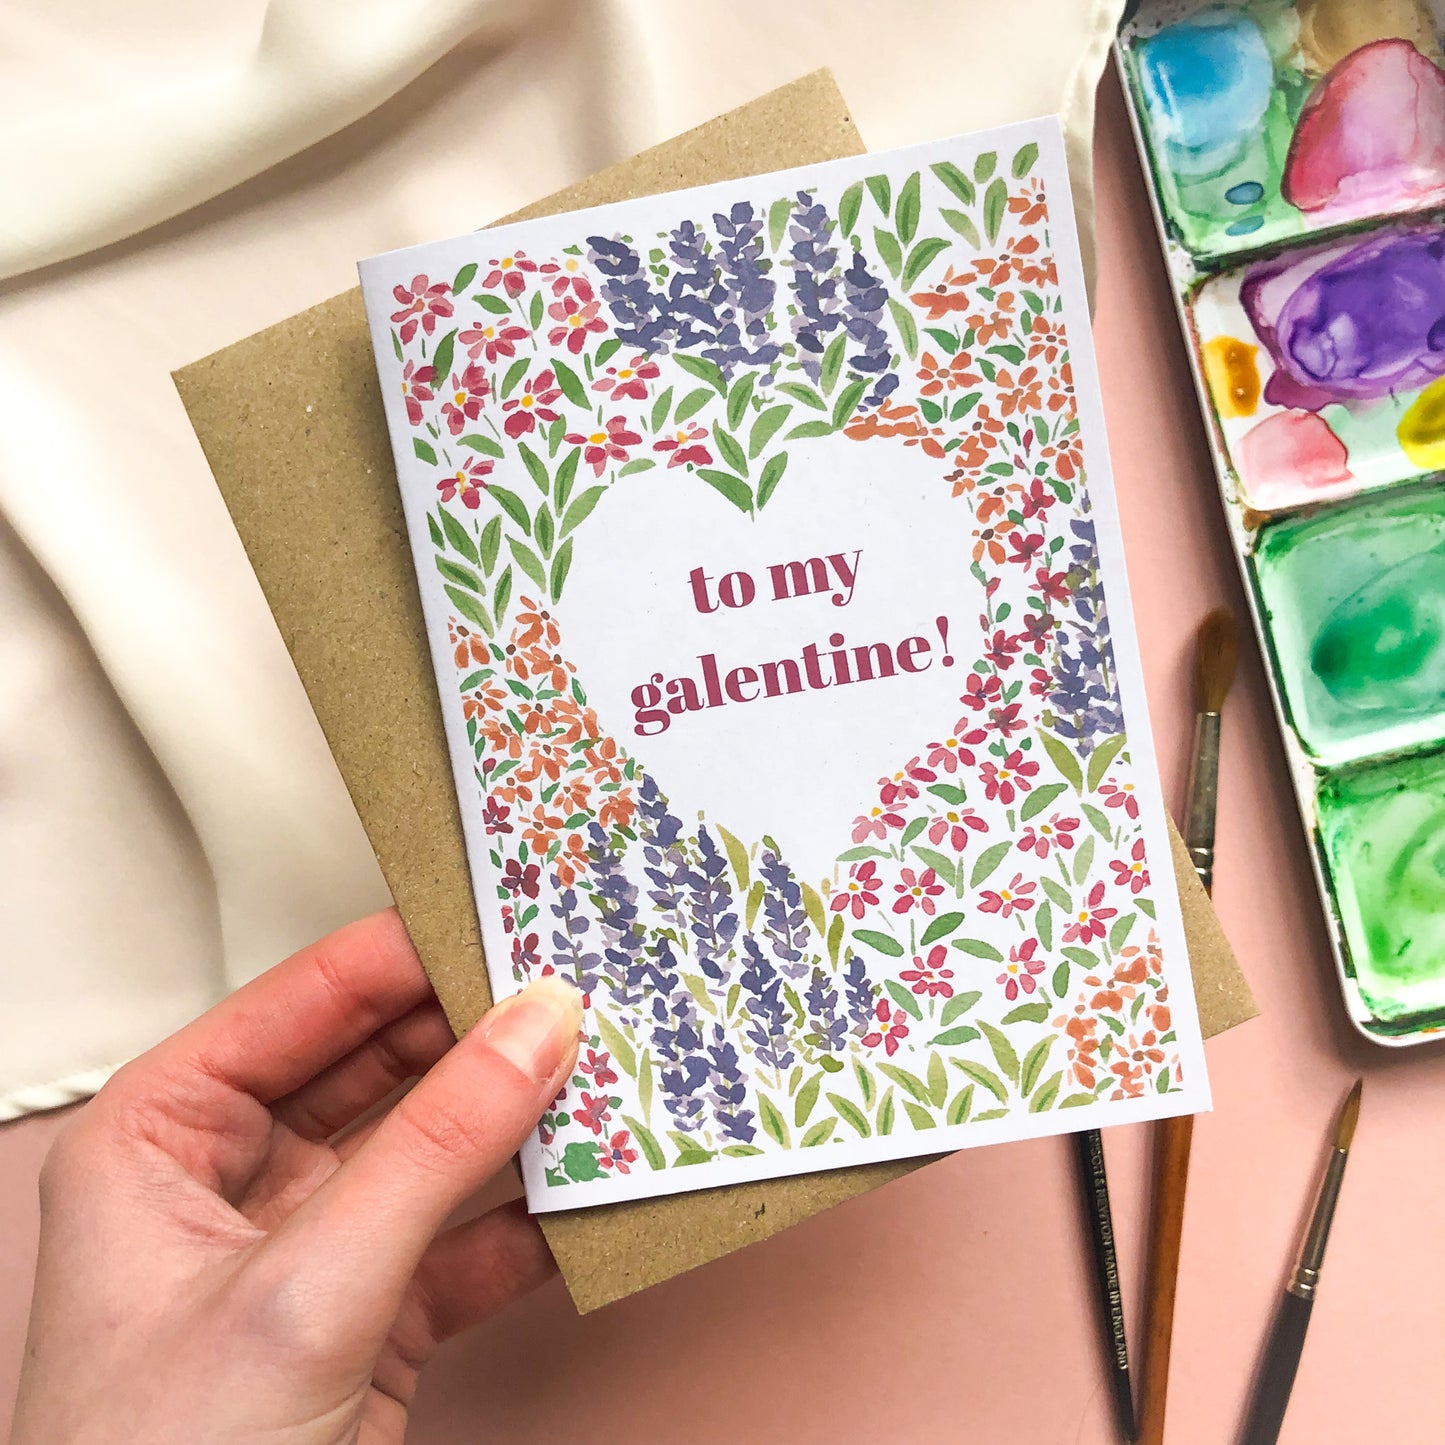 To My Galentine! Floral Valentine's Day Card for Female Friend